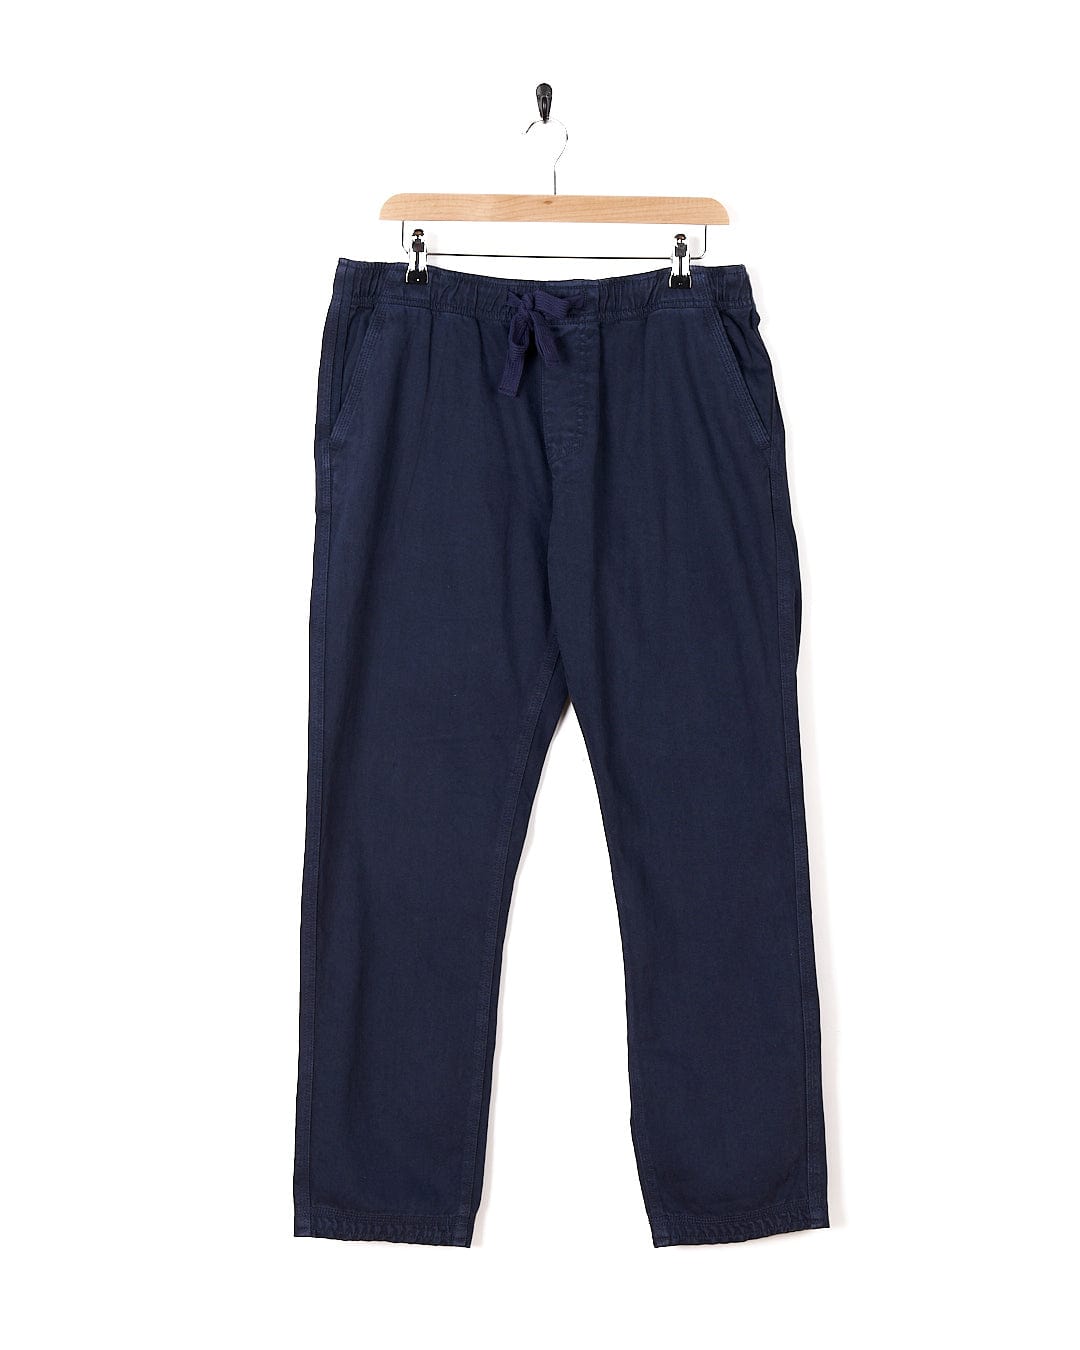 A pair of Meddon - Mens Twill Trouser - Blue pants hanging on a hanger, by Saltrock.